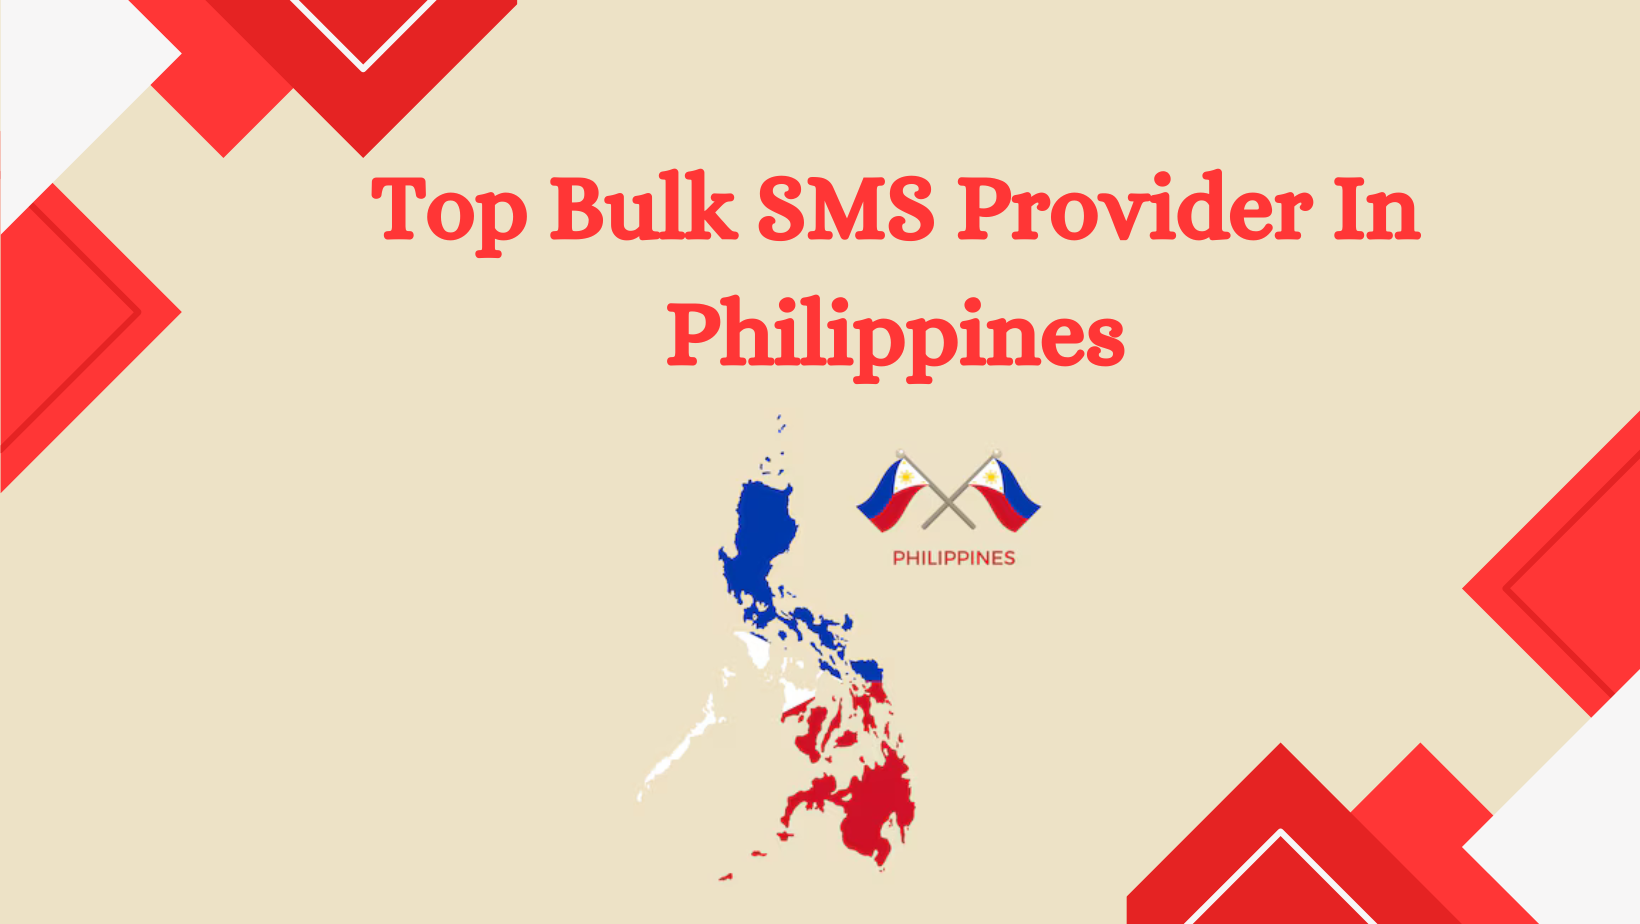 Top Bulk SMS Provider In Philippines